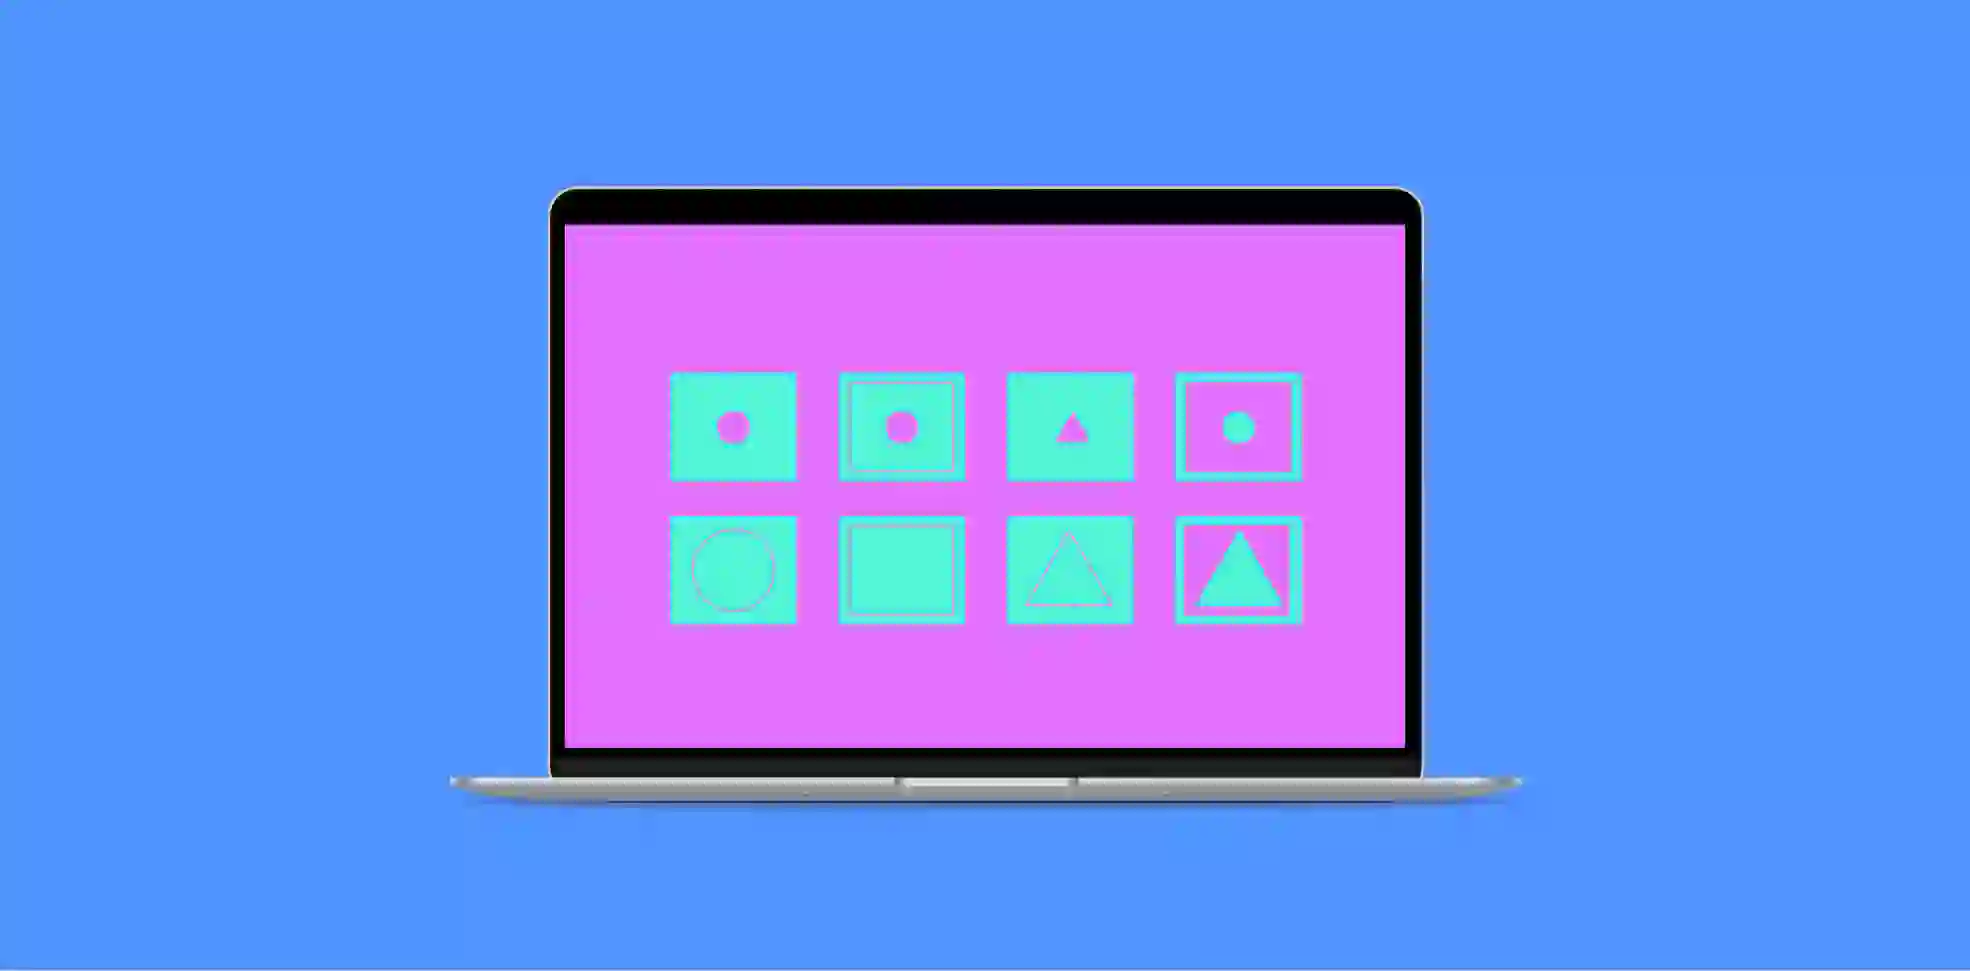 cards with symbols on a laptop screen on a blue background